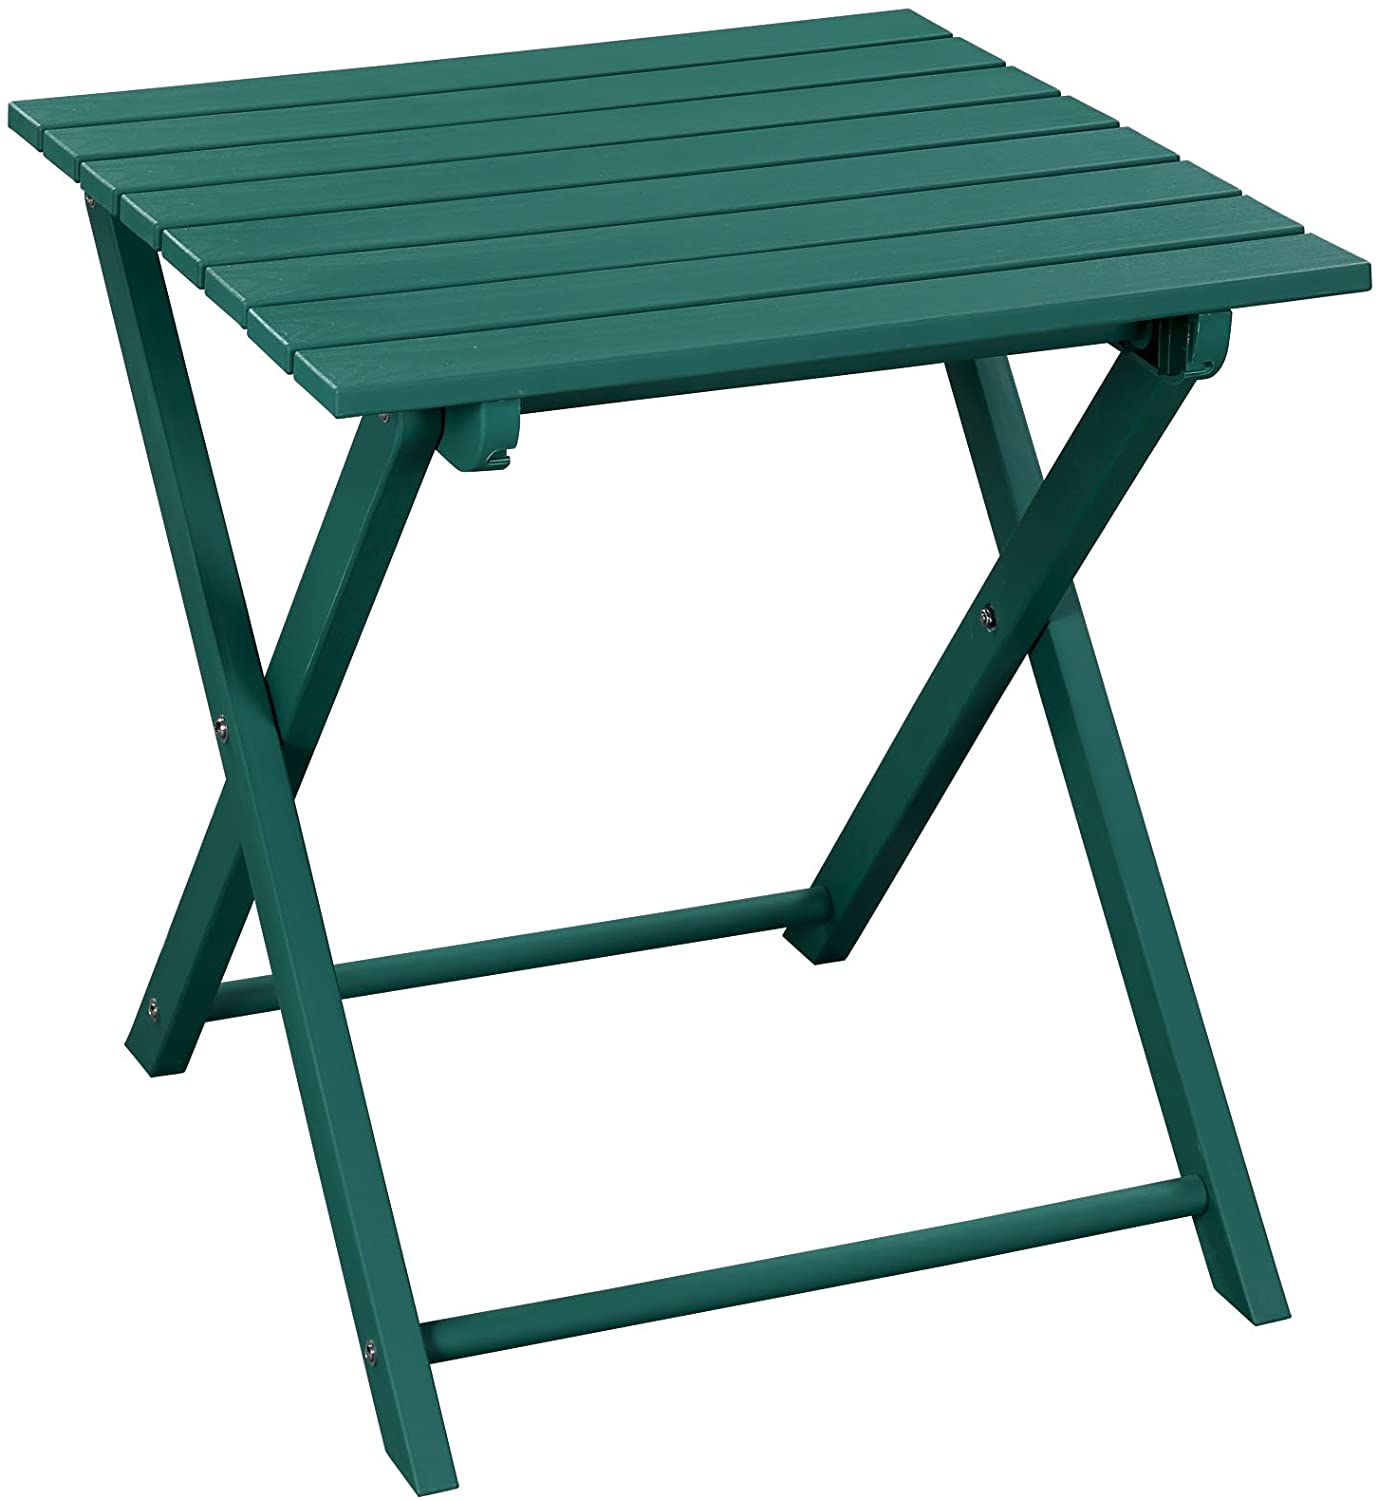 Island Gale 5 Piece Patio Bistro Set Folding Table and Chair Set, Outdoor Camping Furniture Set with Quick-fold Design (Mongolia Green) nylon - image 2 of 3